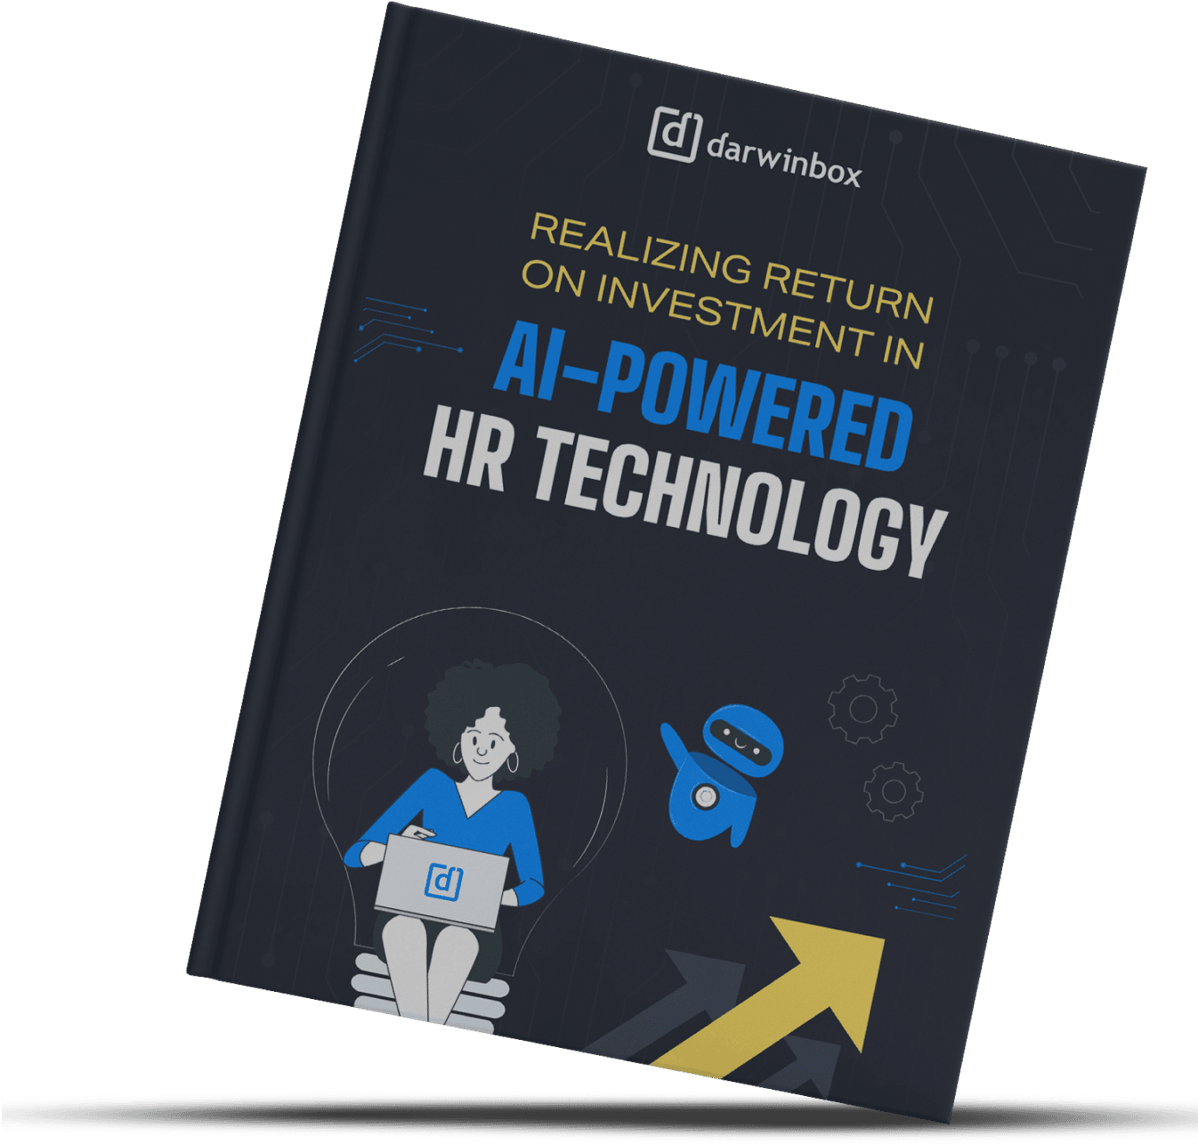 Realizing Return on Investment in AI-Powered HR Technology